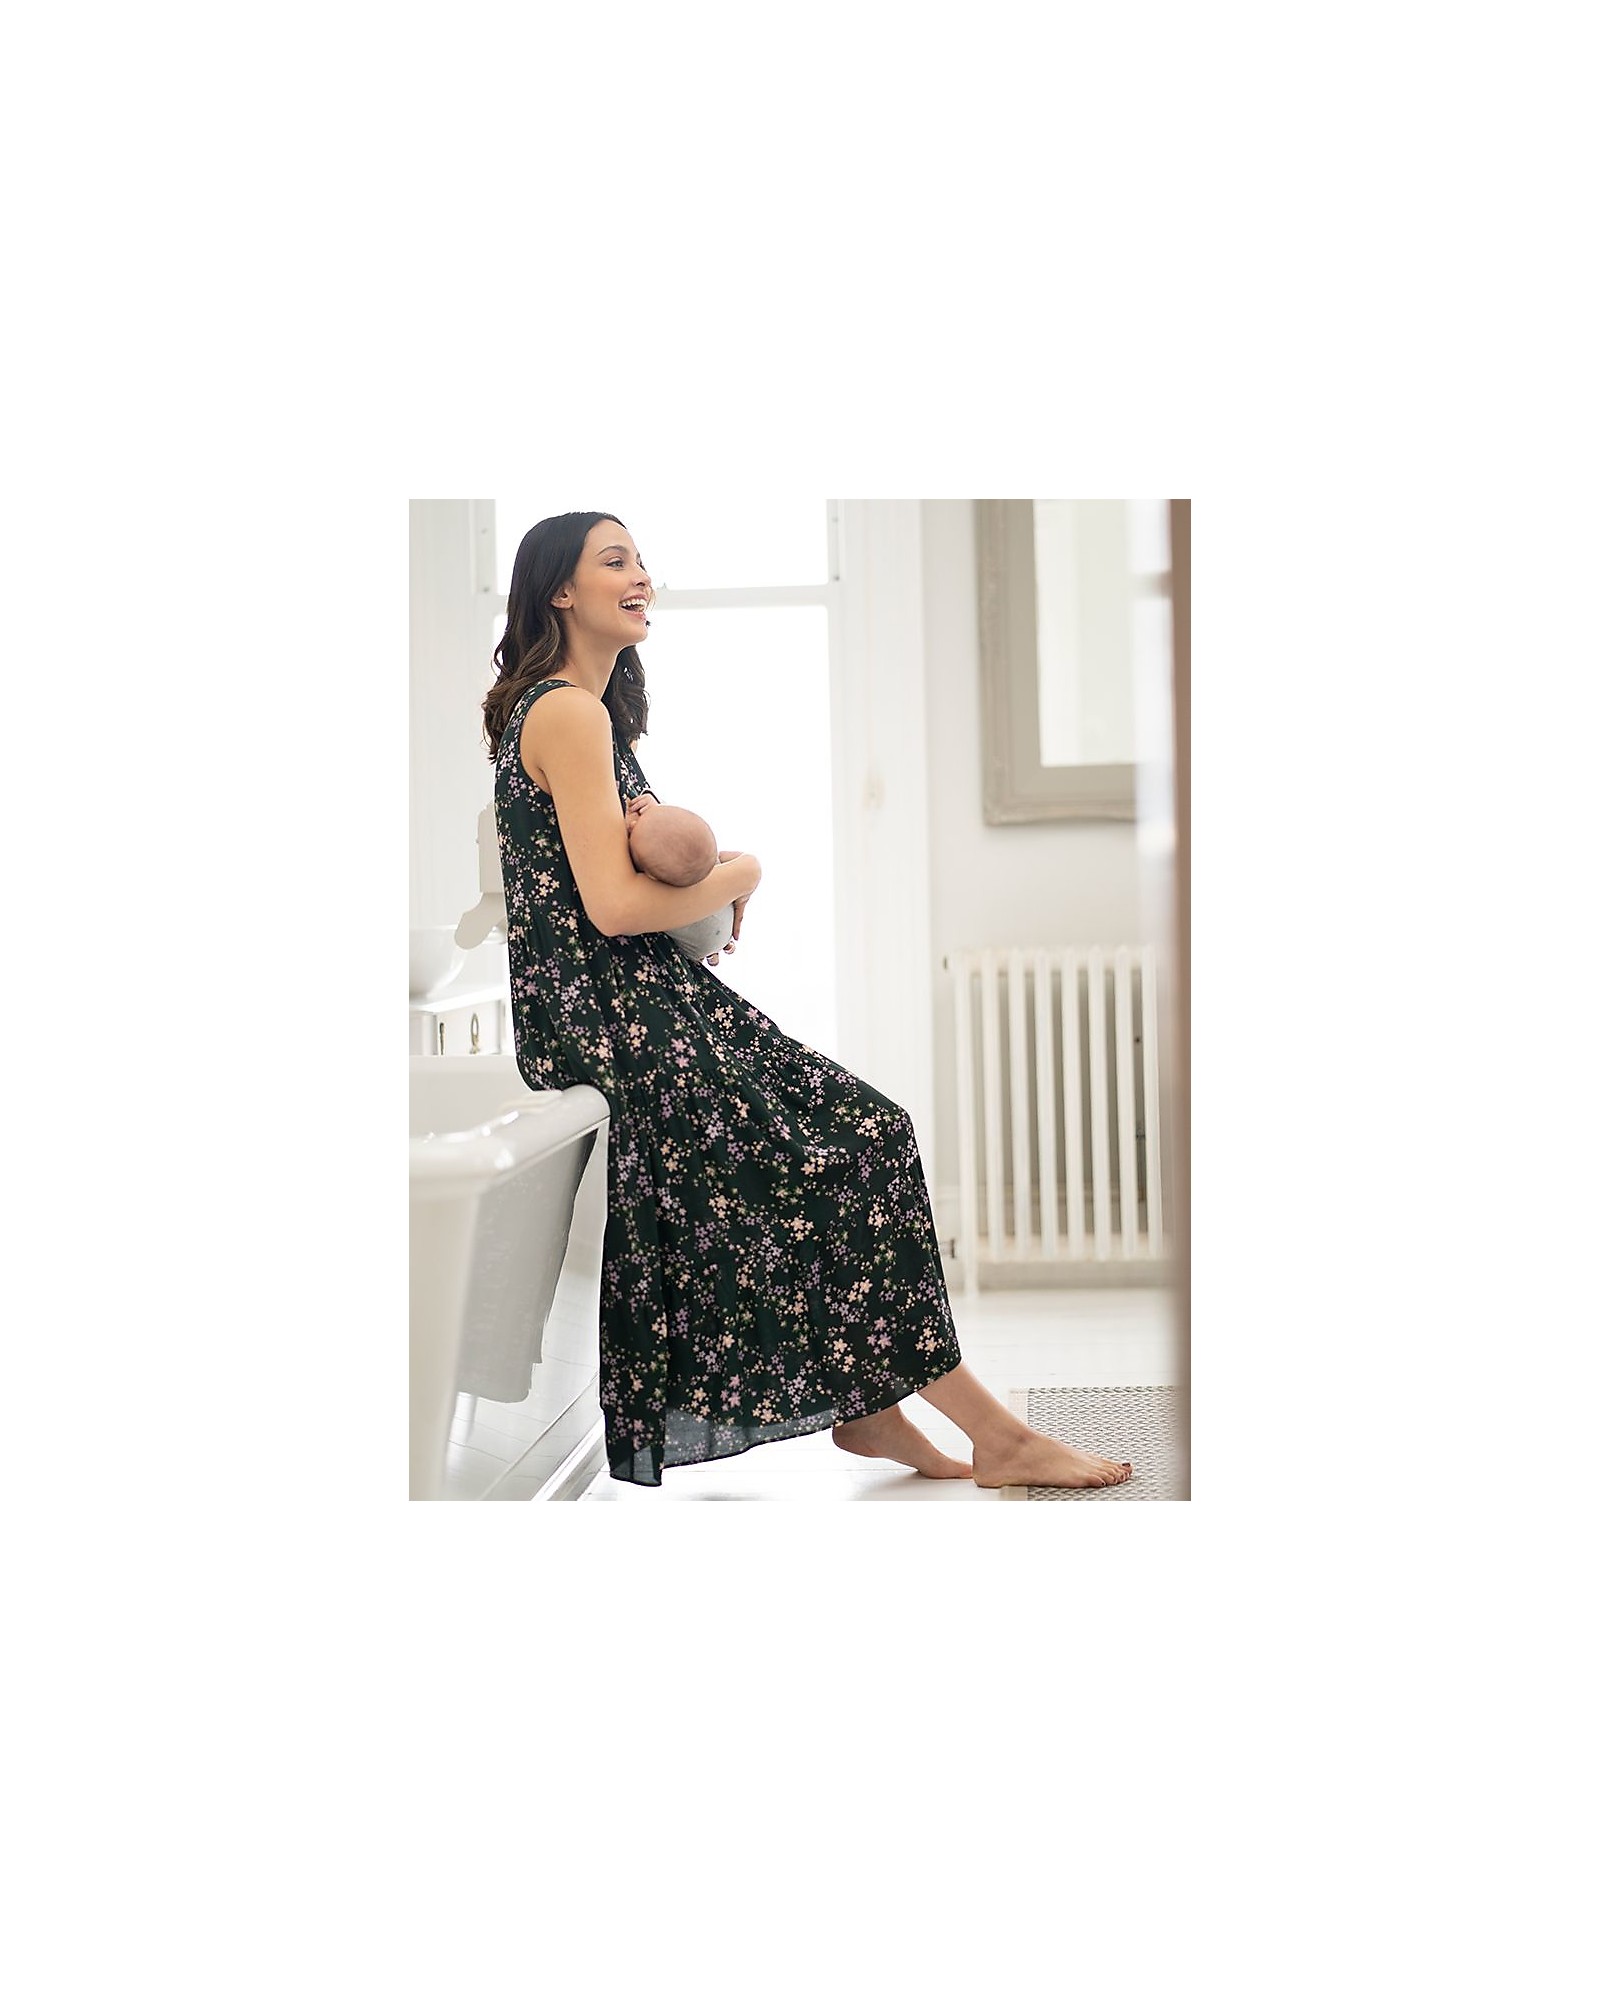 New Look Maternity tiered nursing dress in black floral